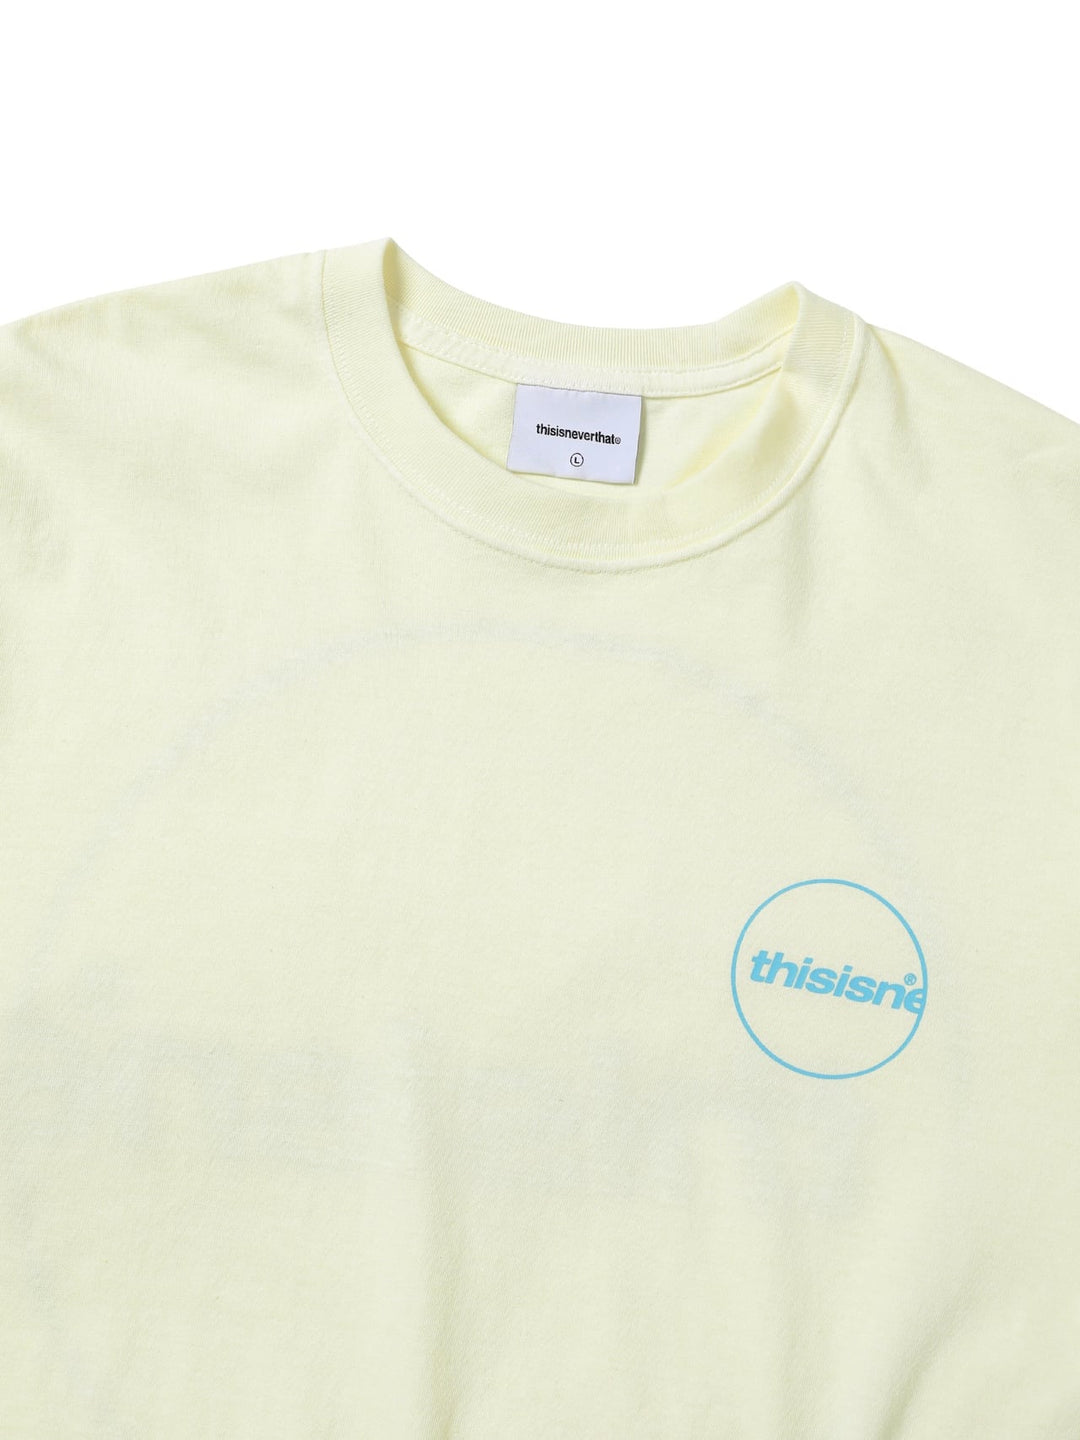 THIS IS NEVER THAT C-LOGO TEE-IVORY